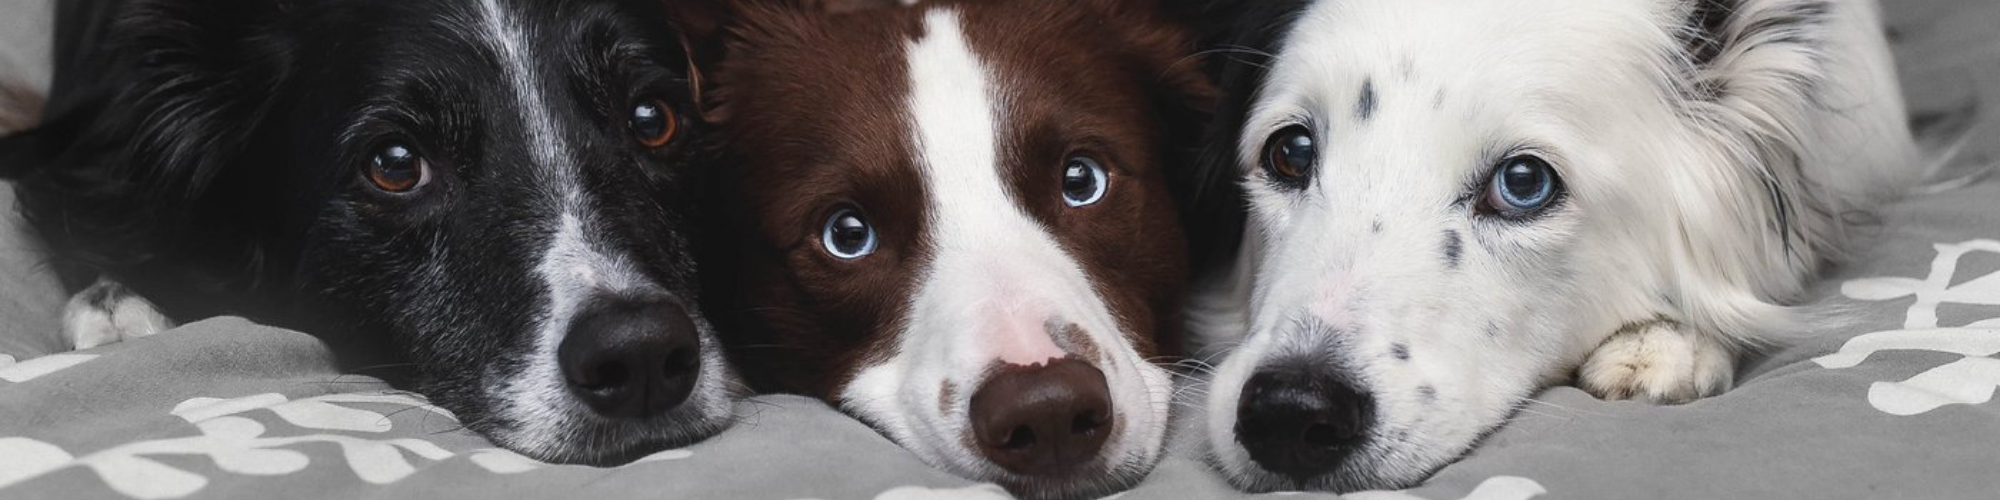 Close-up of a dog's face with blue eyes and nose.